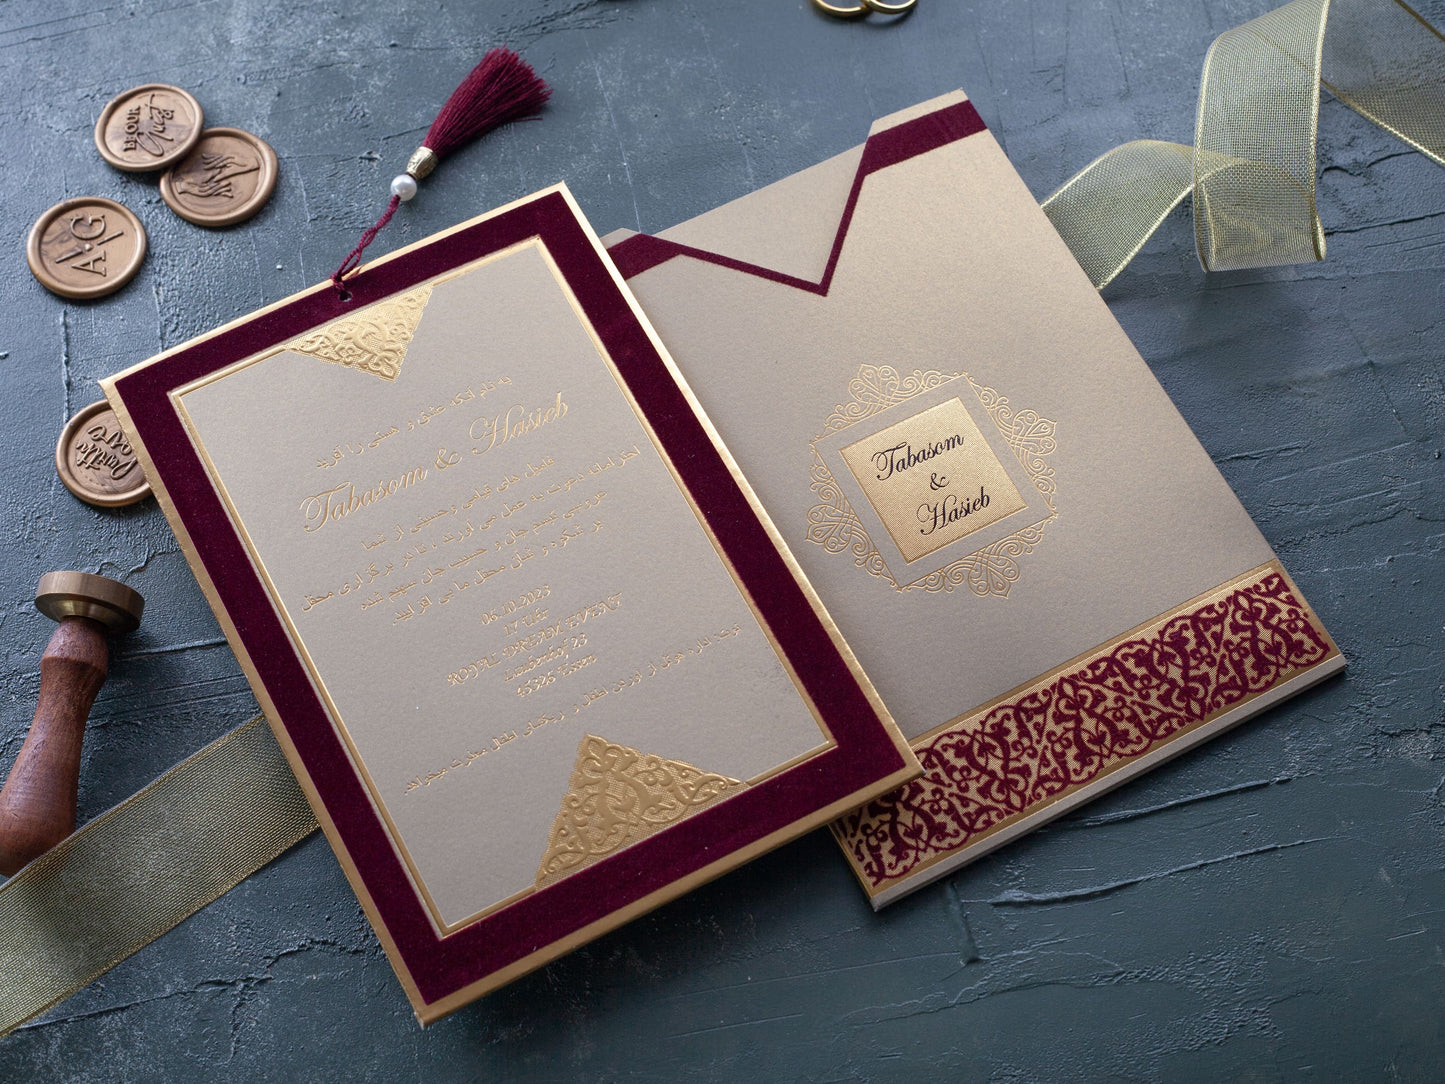 Gold Foil Printed Wedding Invitation with Velvet Accents